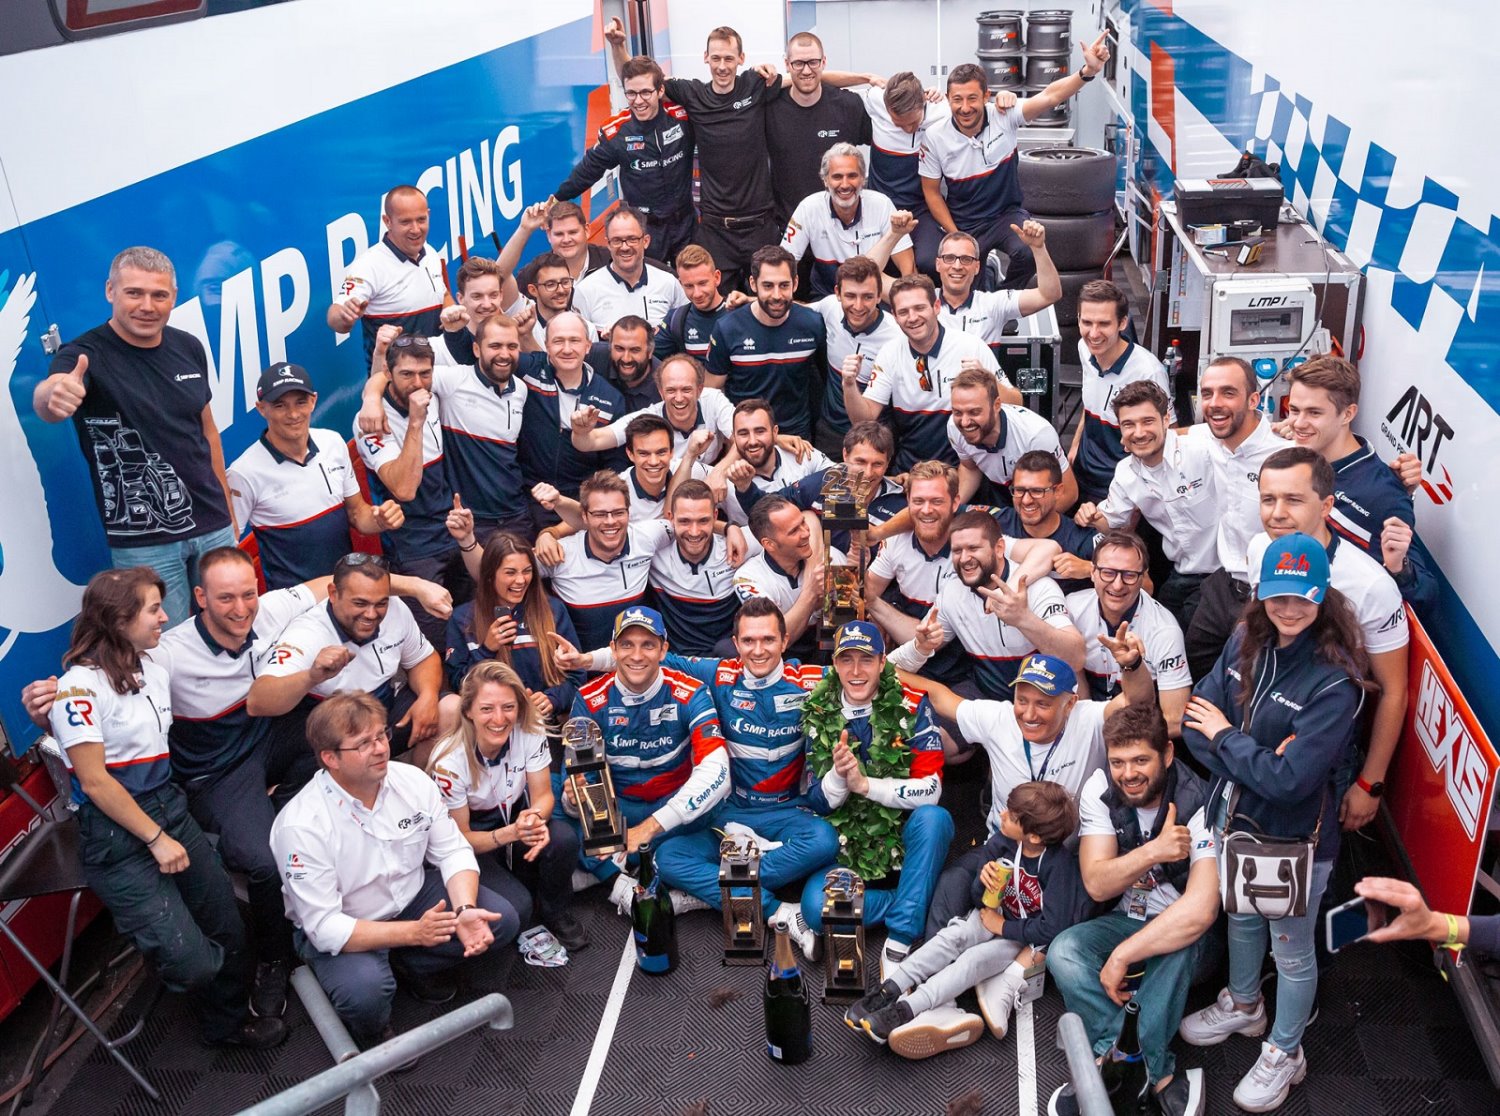 With zero chance of winning against the Toyotas and the biased rules, SMP Racing waves goodbye to WEC